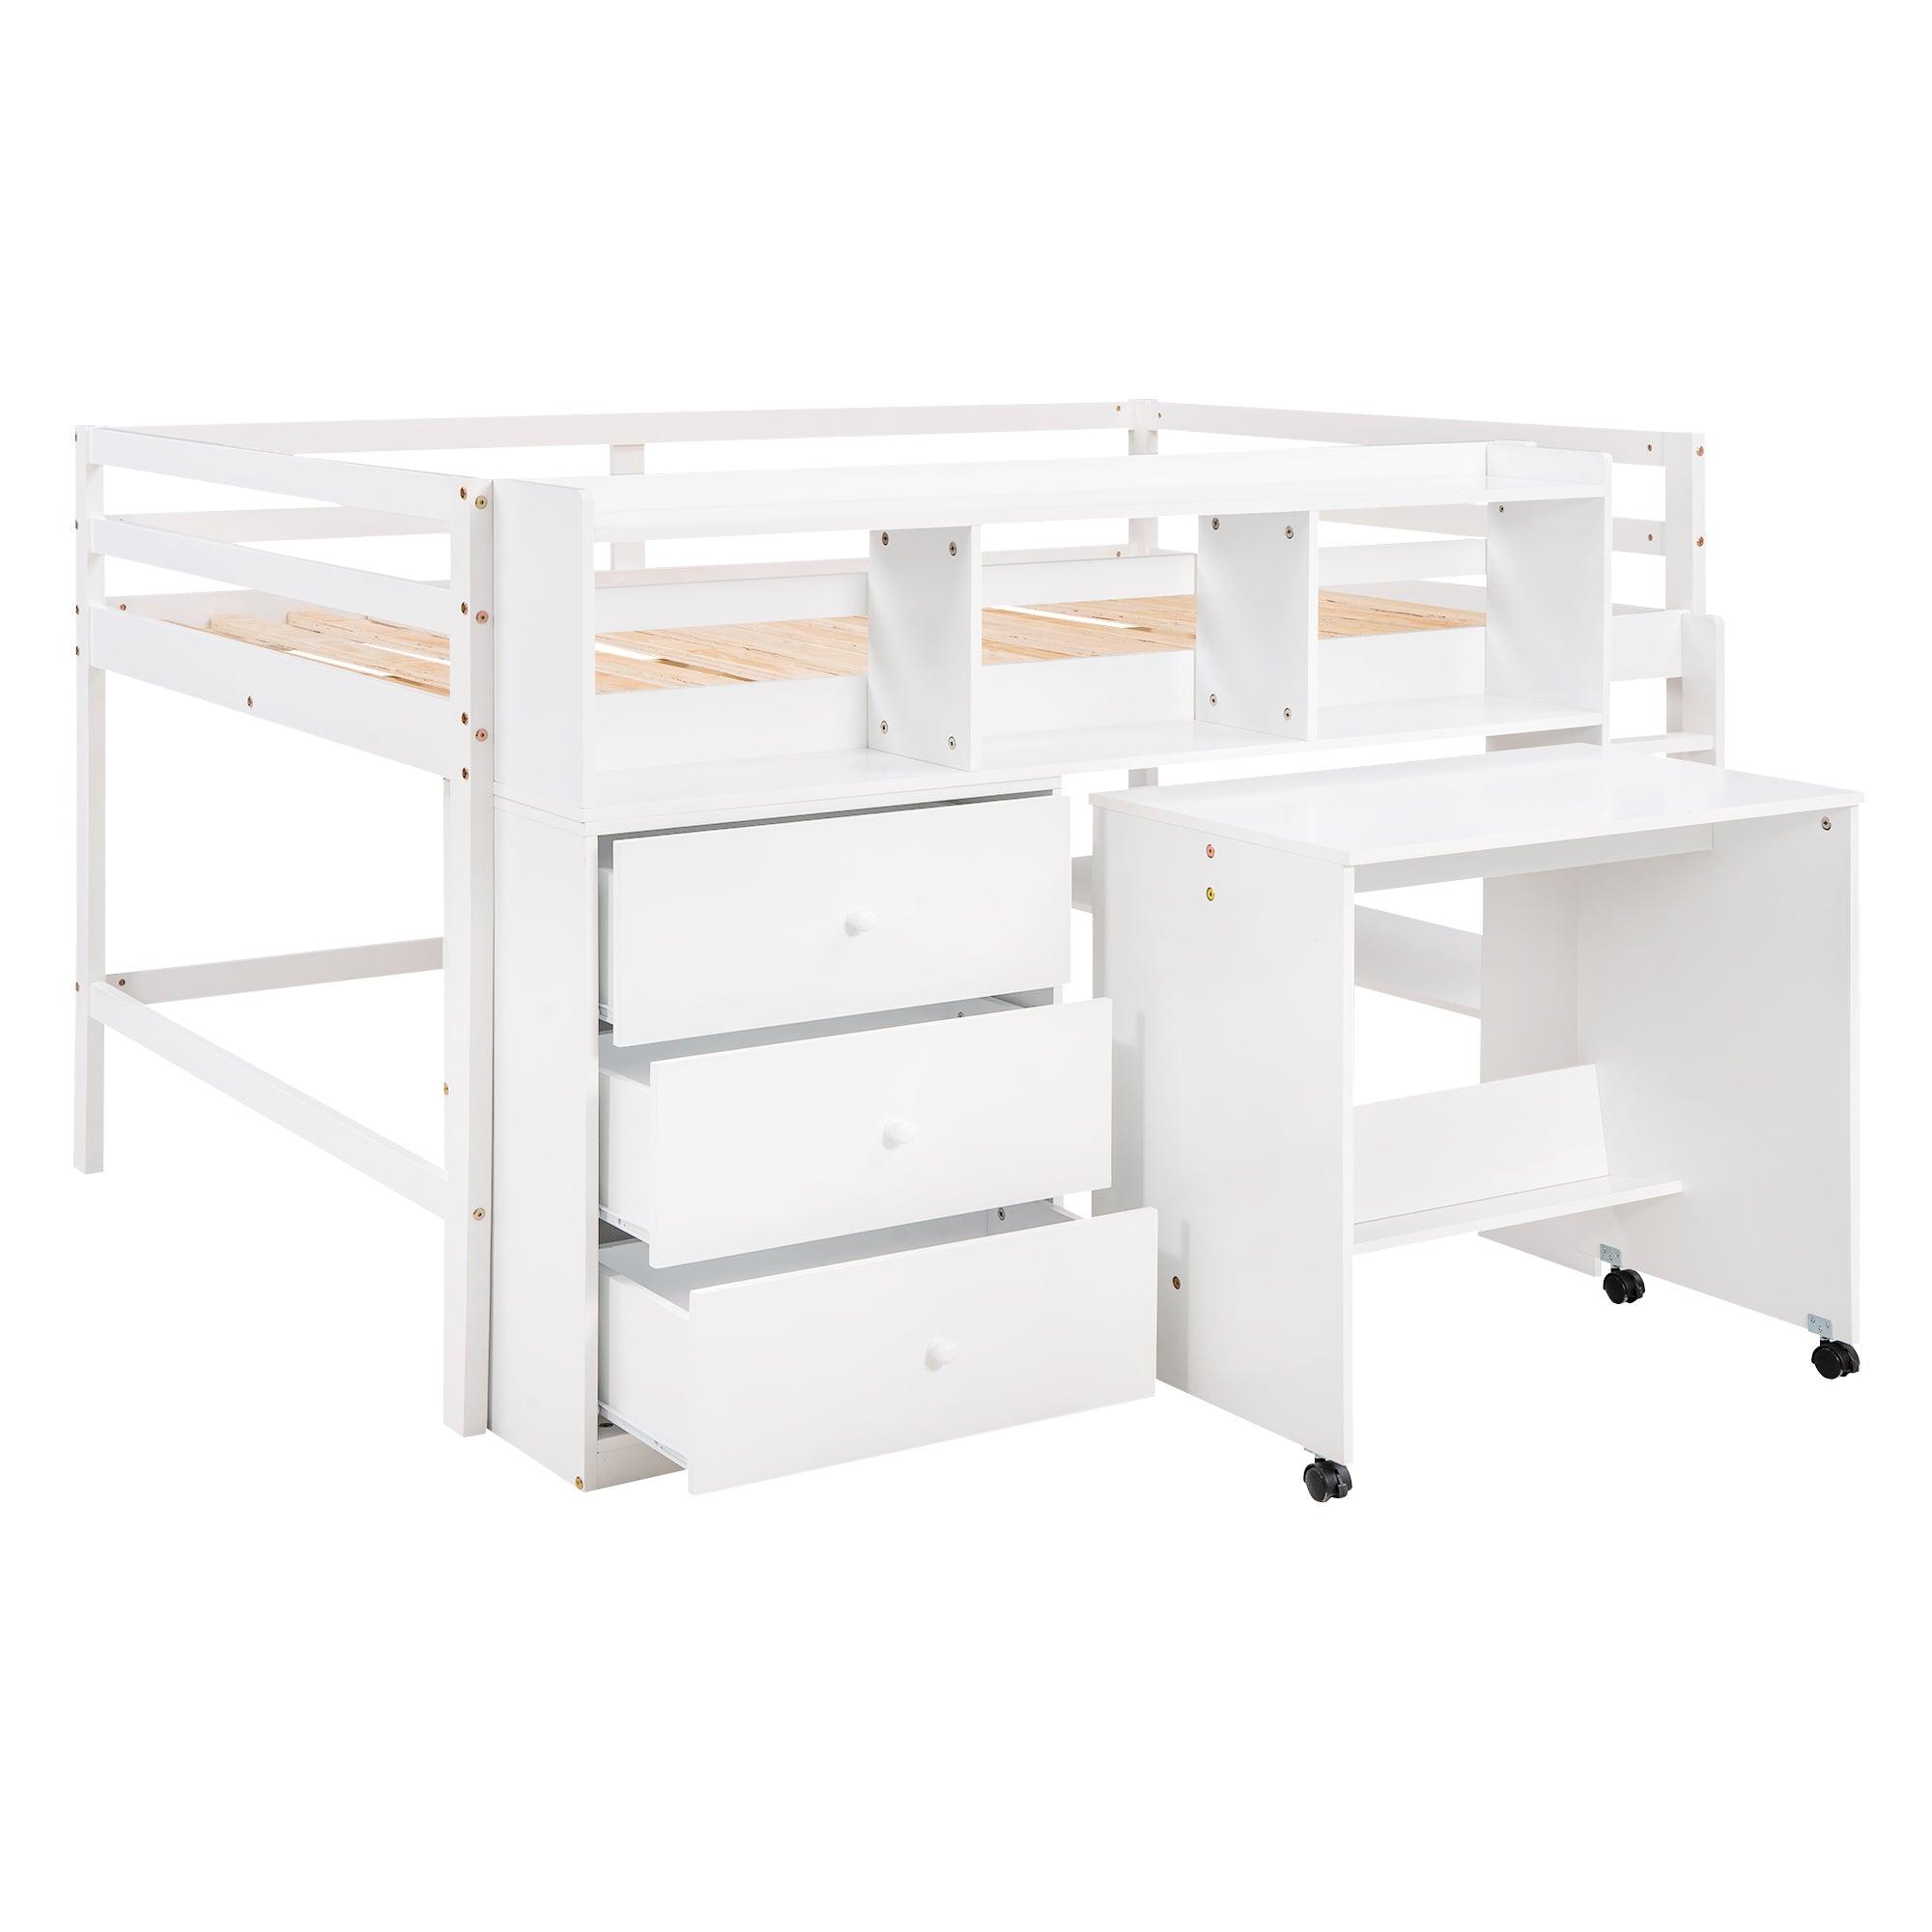 Full Size Low Loft Bed with Rolling Portable Desk, Drawers and Shelves, White